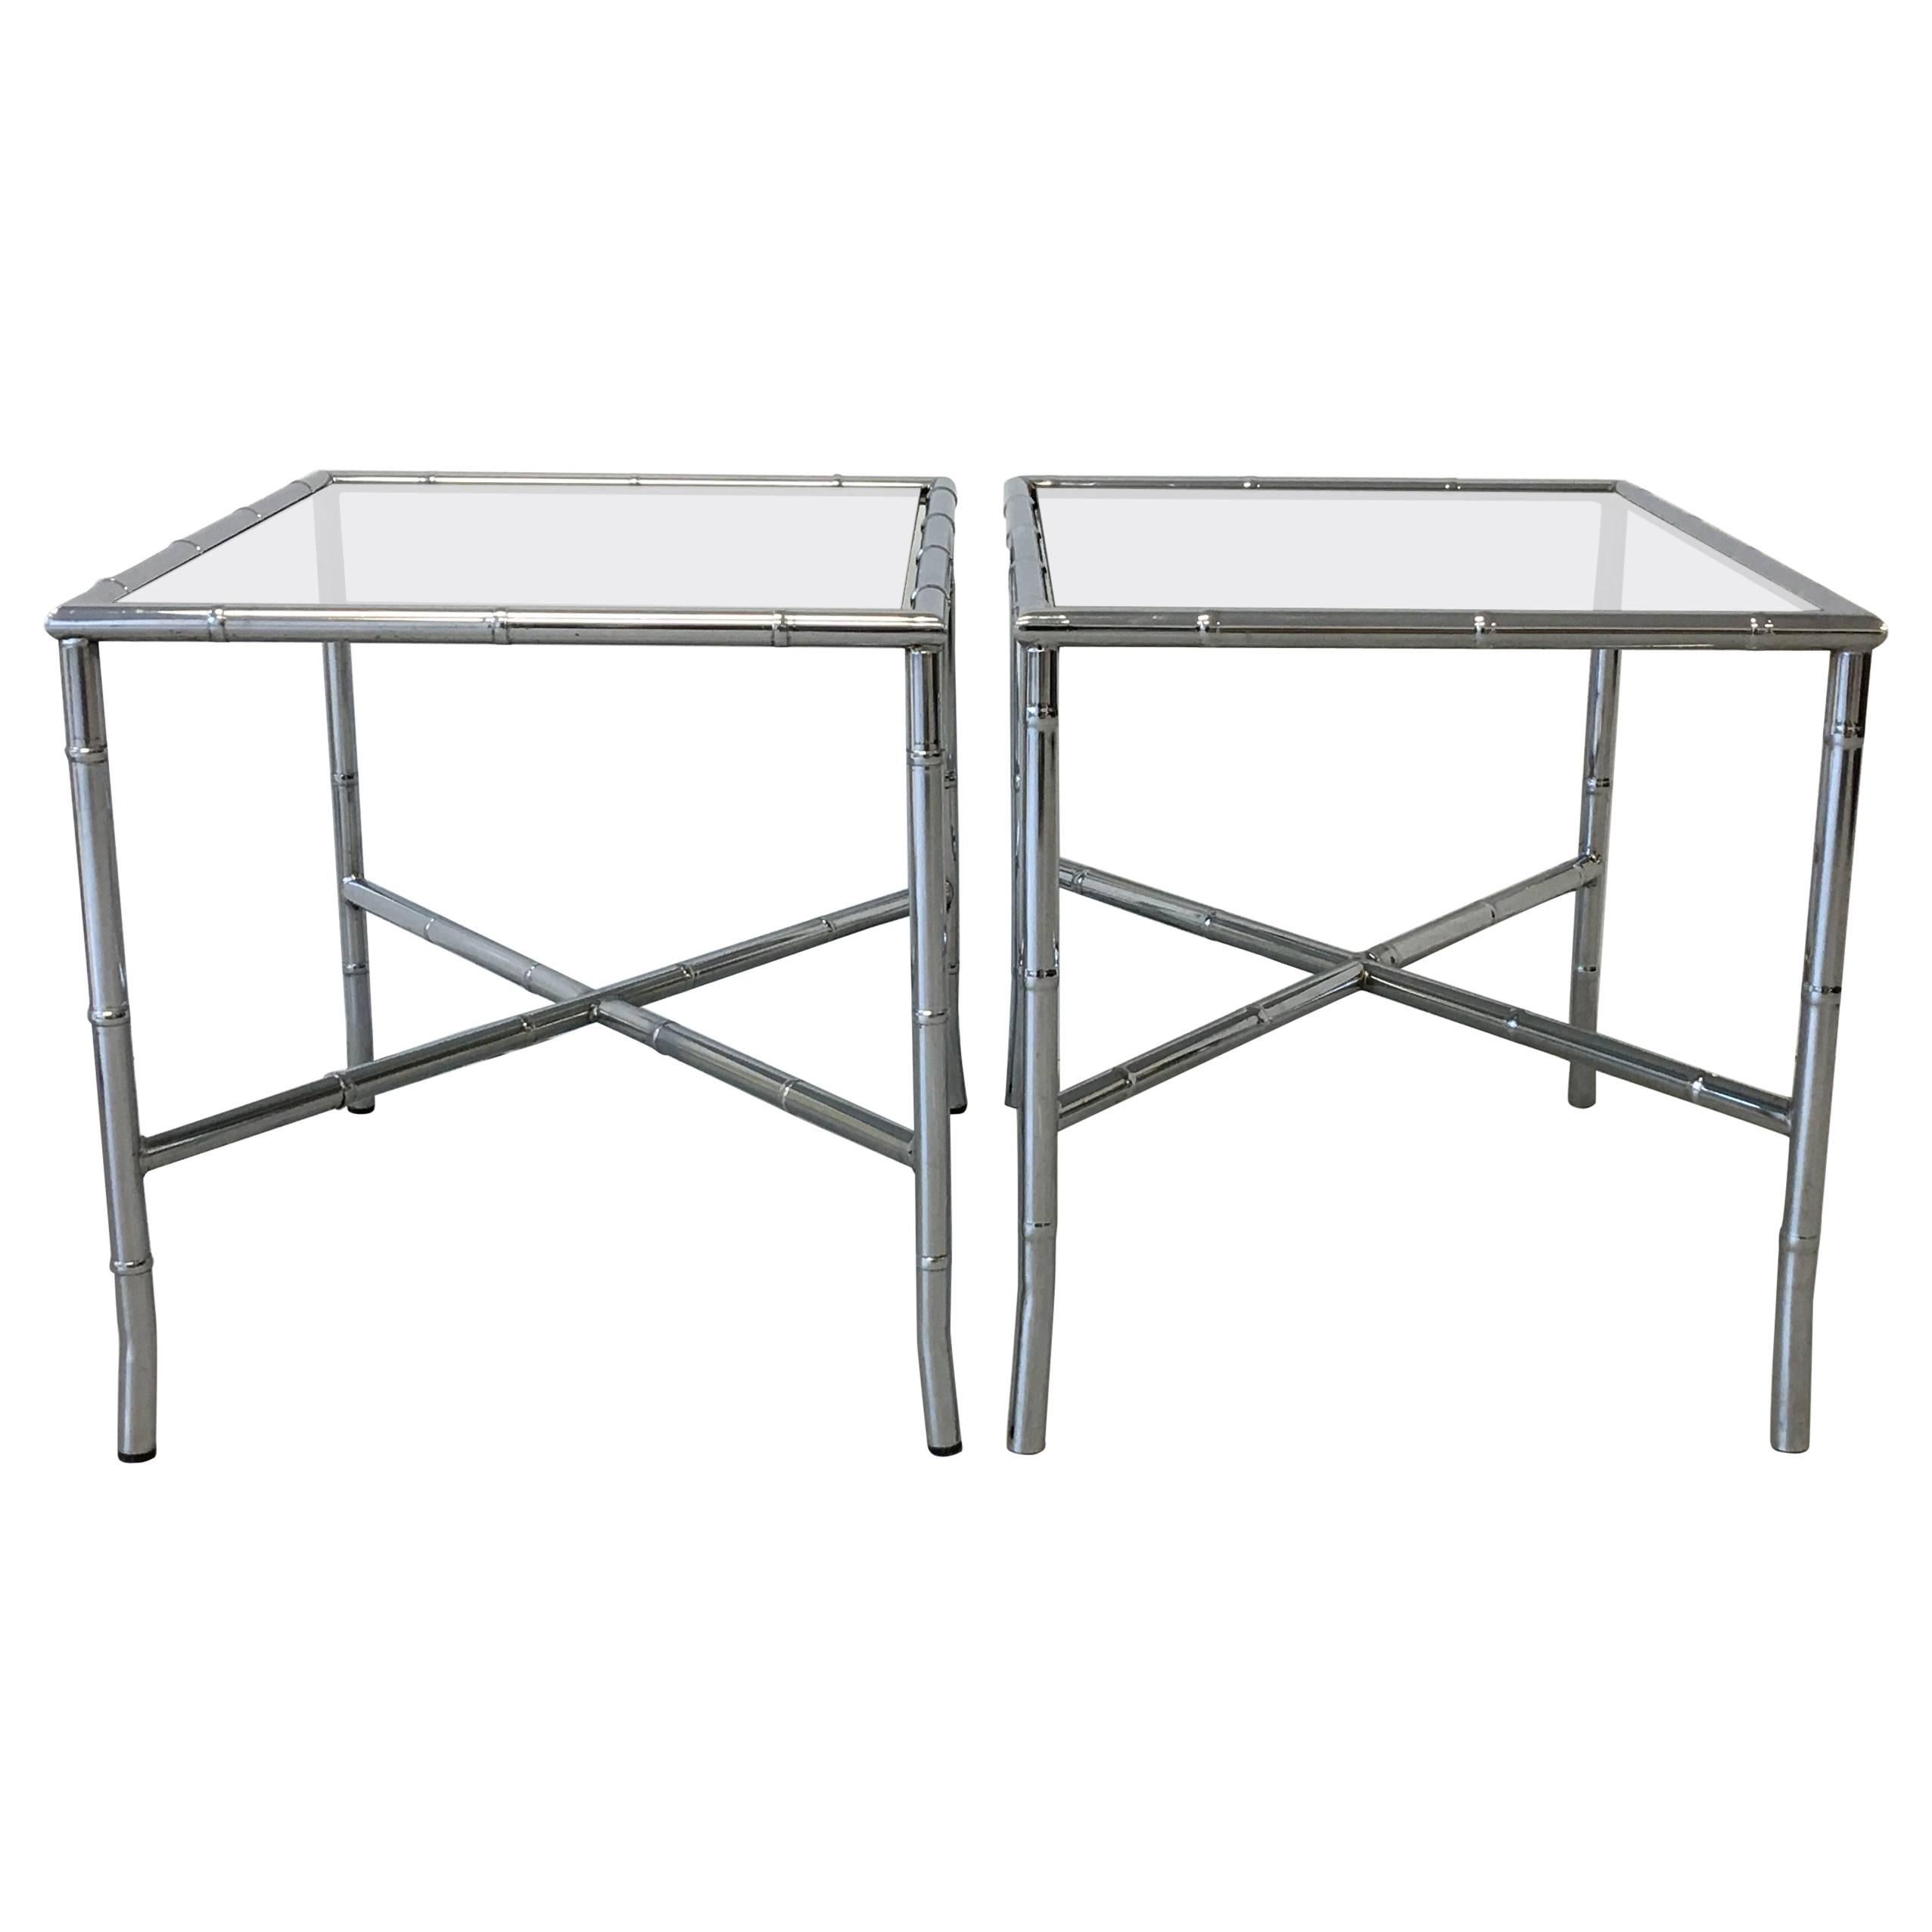 1970s Chrome Faux Bamboo Side Tables with Smoked Glass, Pair